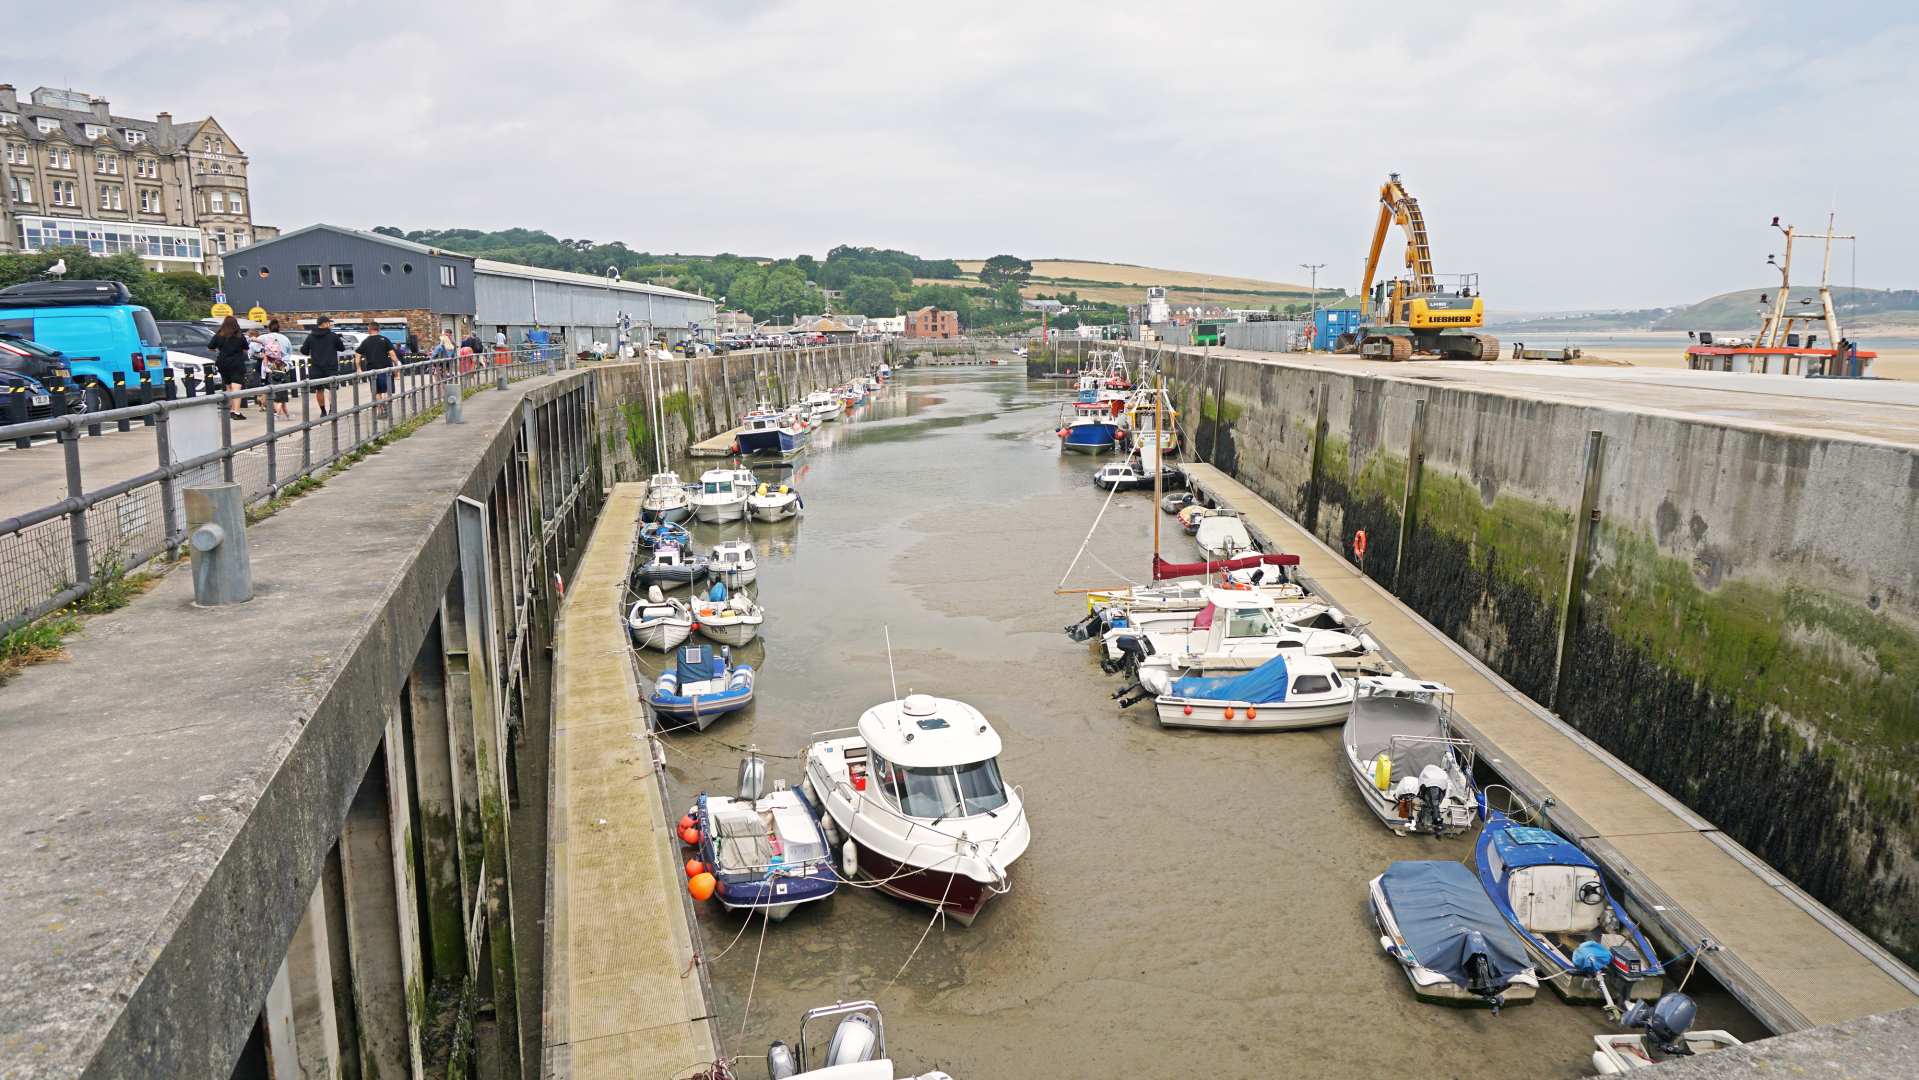 South Quay - Padstow - South Quay - Padstow